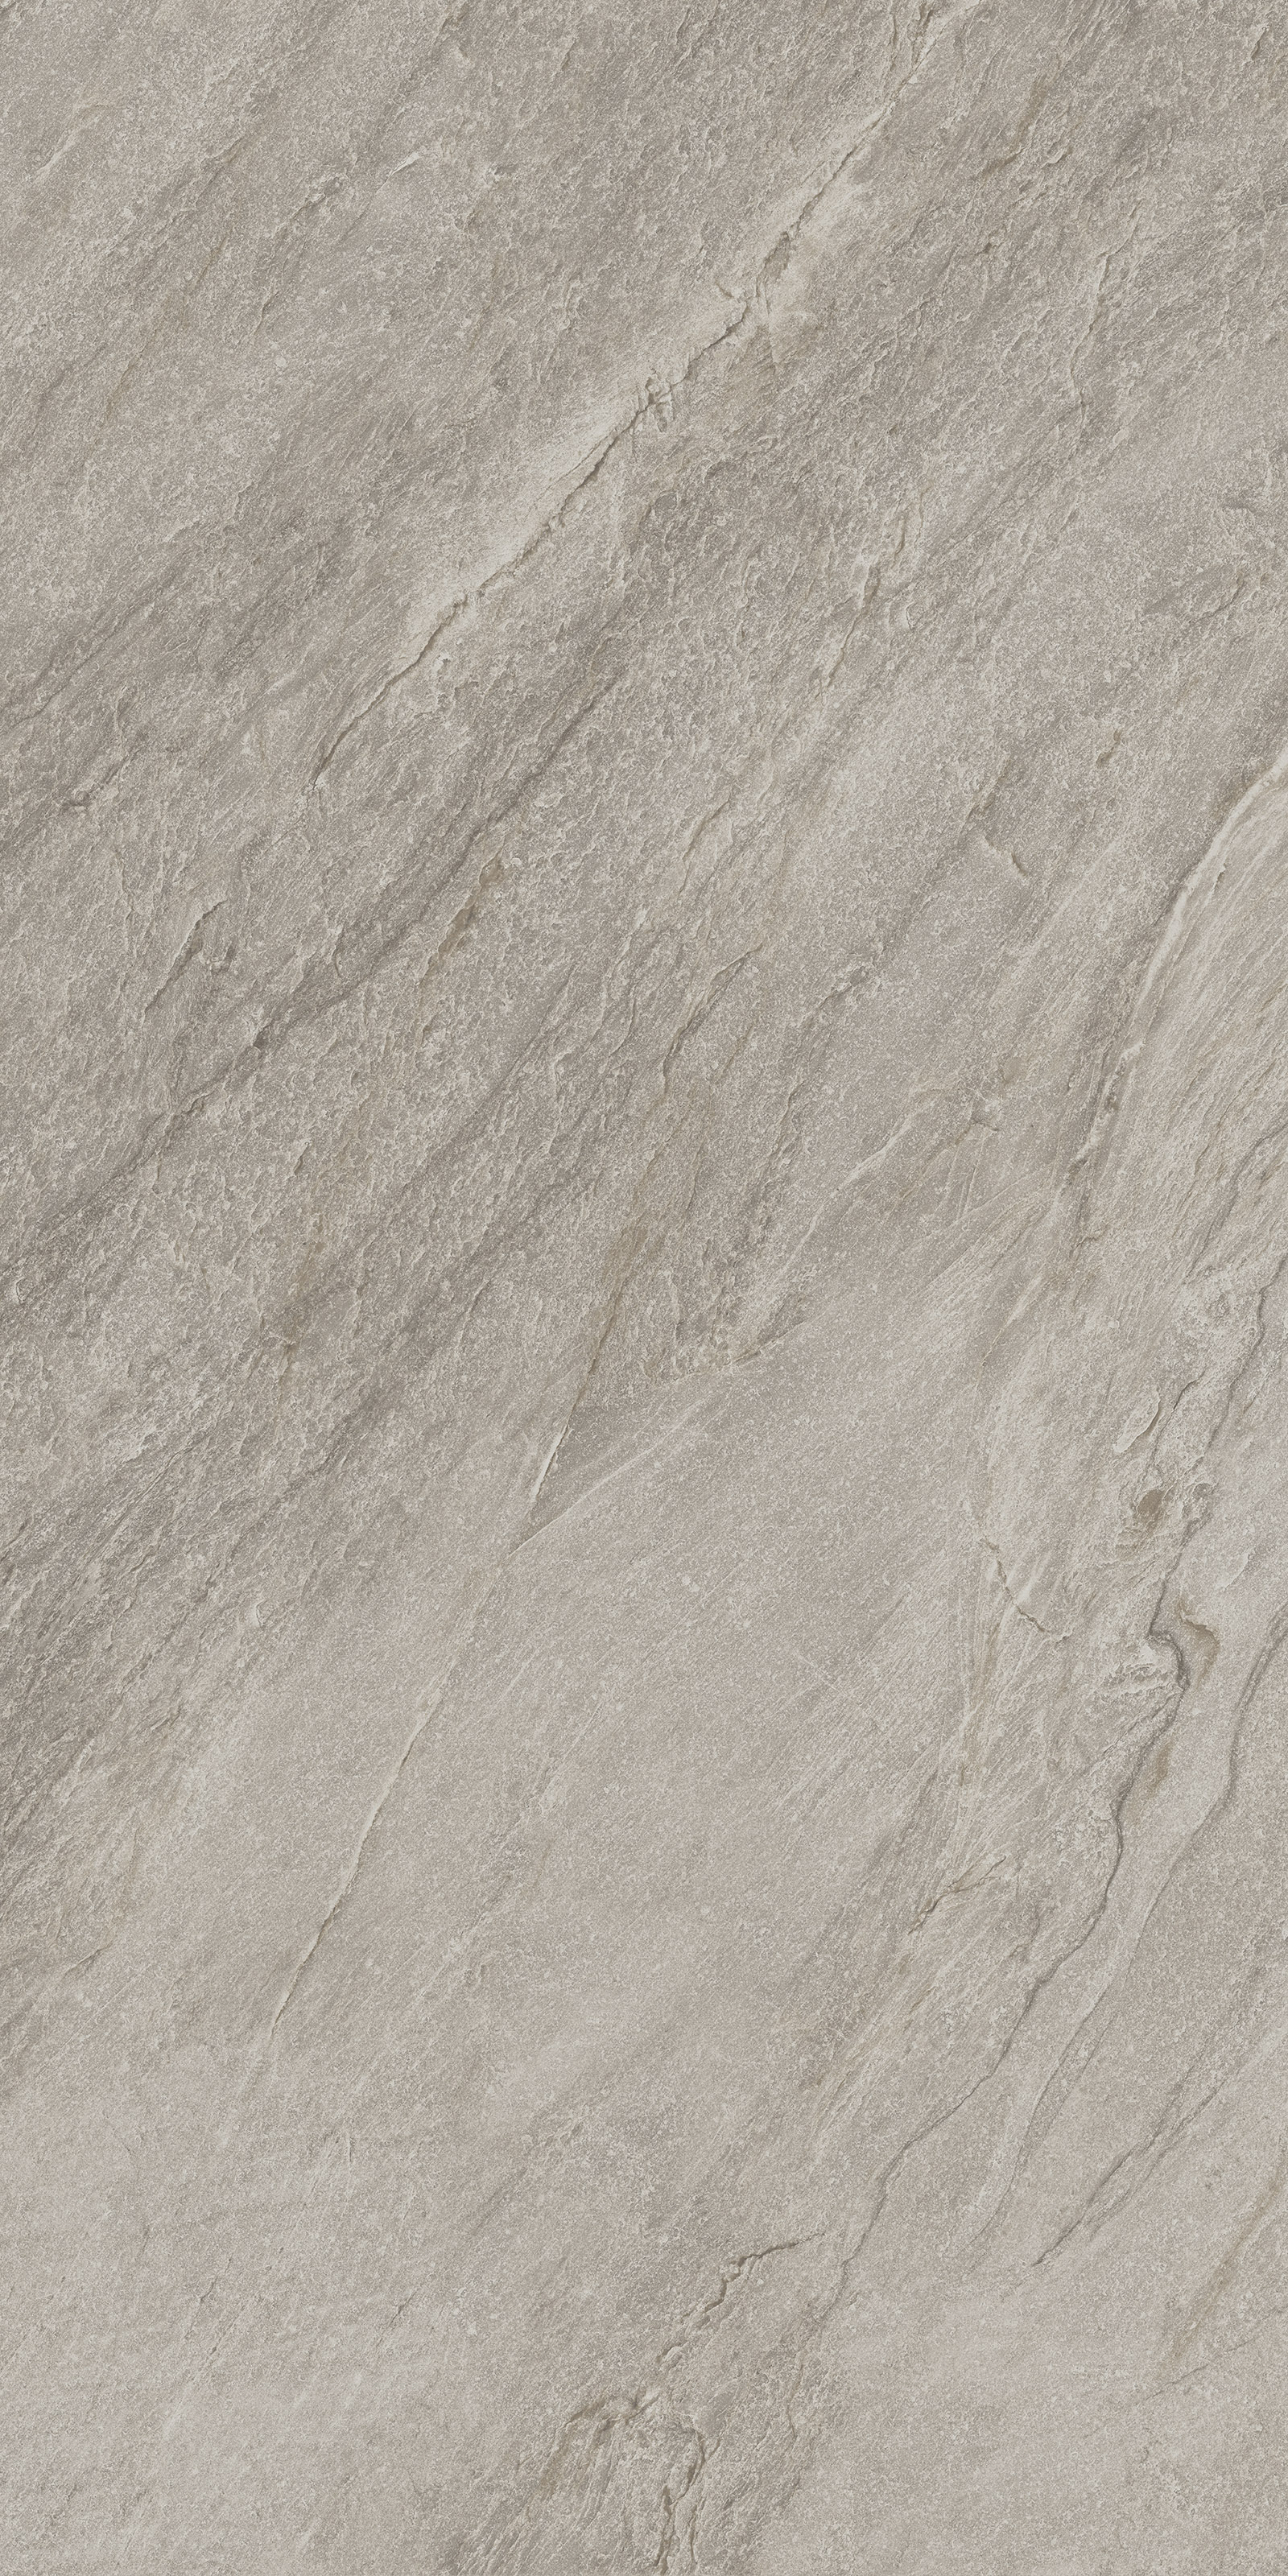 Imola Vibes Beige Scuro Natural Strutturato Matt 179400 90x180cm rectified 10mm - VIBES 9018BS RM